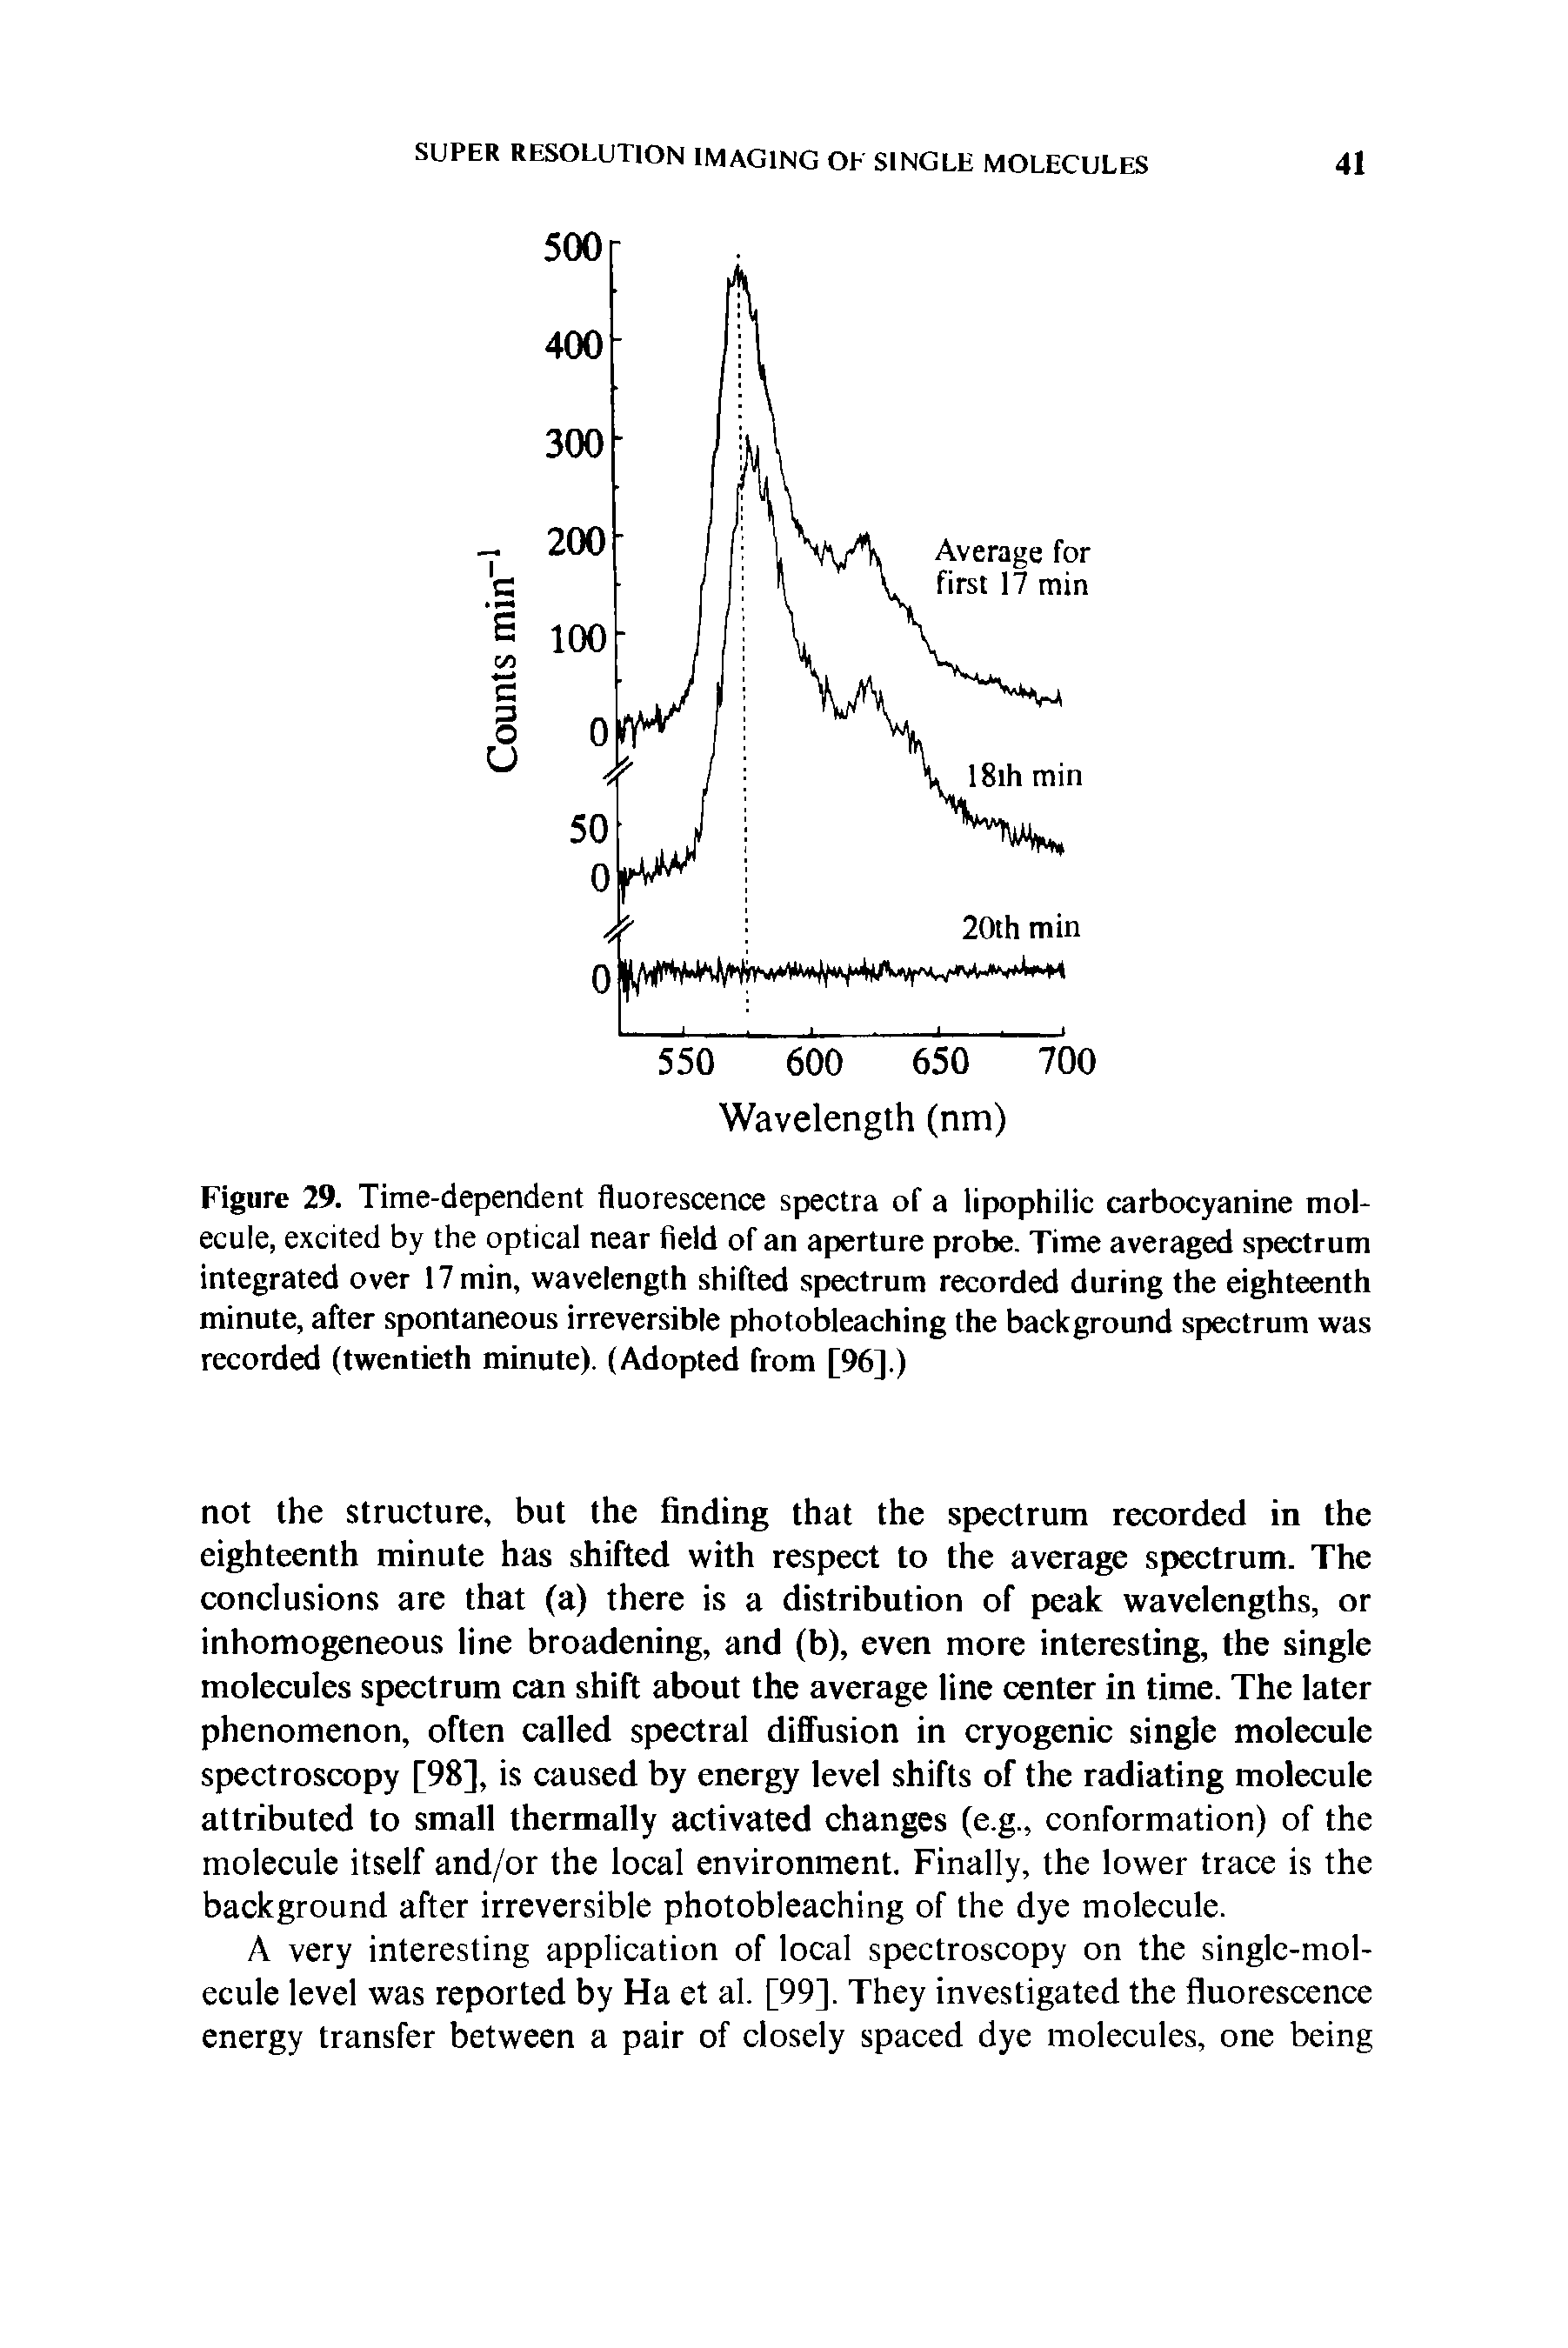 Figure 29. Time-dependent fluorescence spectra of a lipophilic carbocyanine molecule, excited by the optical near field of an aperture probe. Time averaged spectrum integrated over 17 min, wavelength shifted spectrum recorded during the eighteenth minute, after spontaneous irreversible photobleaching the background spectrum was recorded (twentieth minute). (Adopted from [96].)...